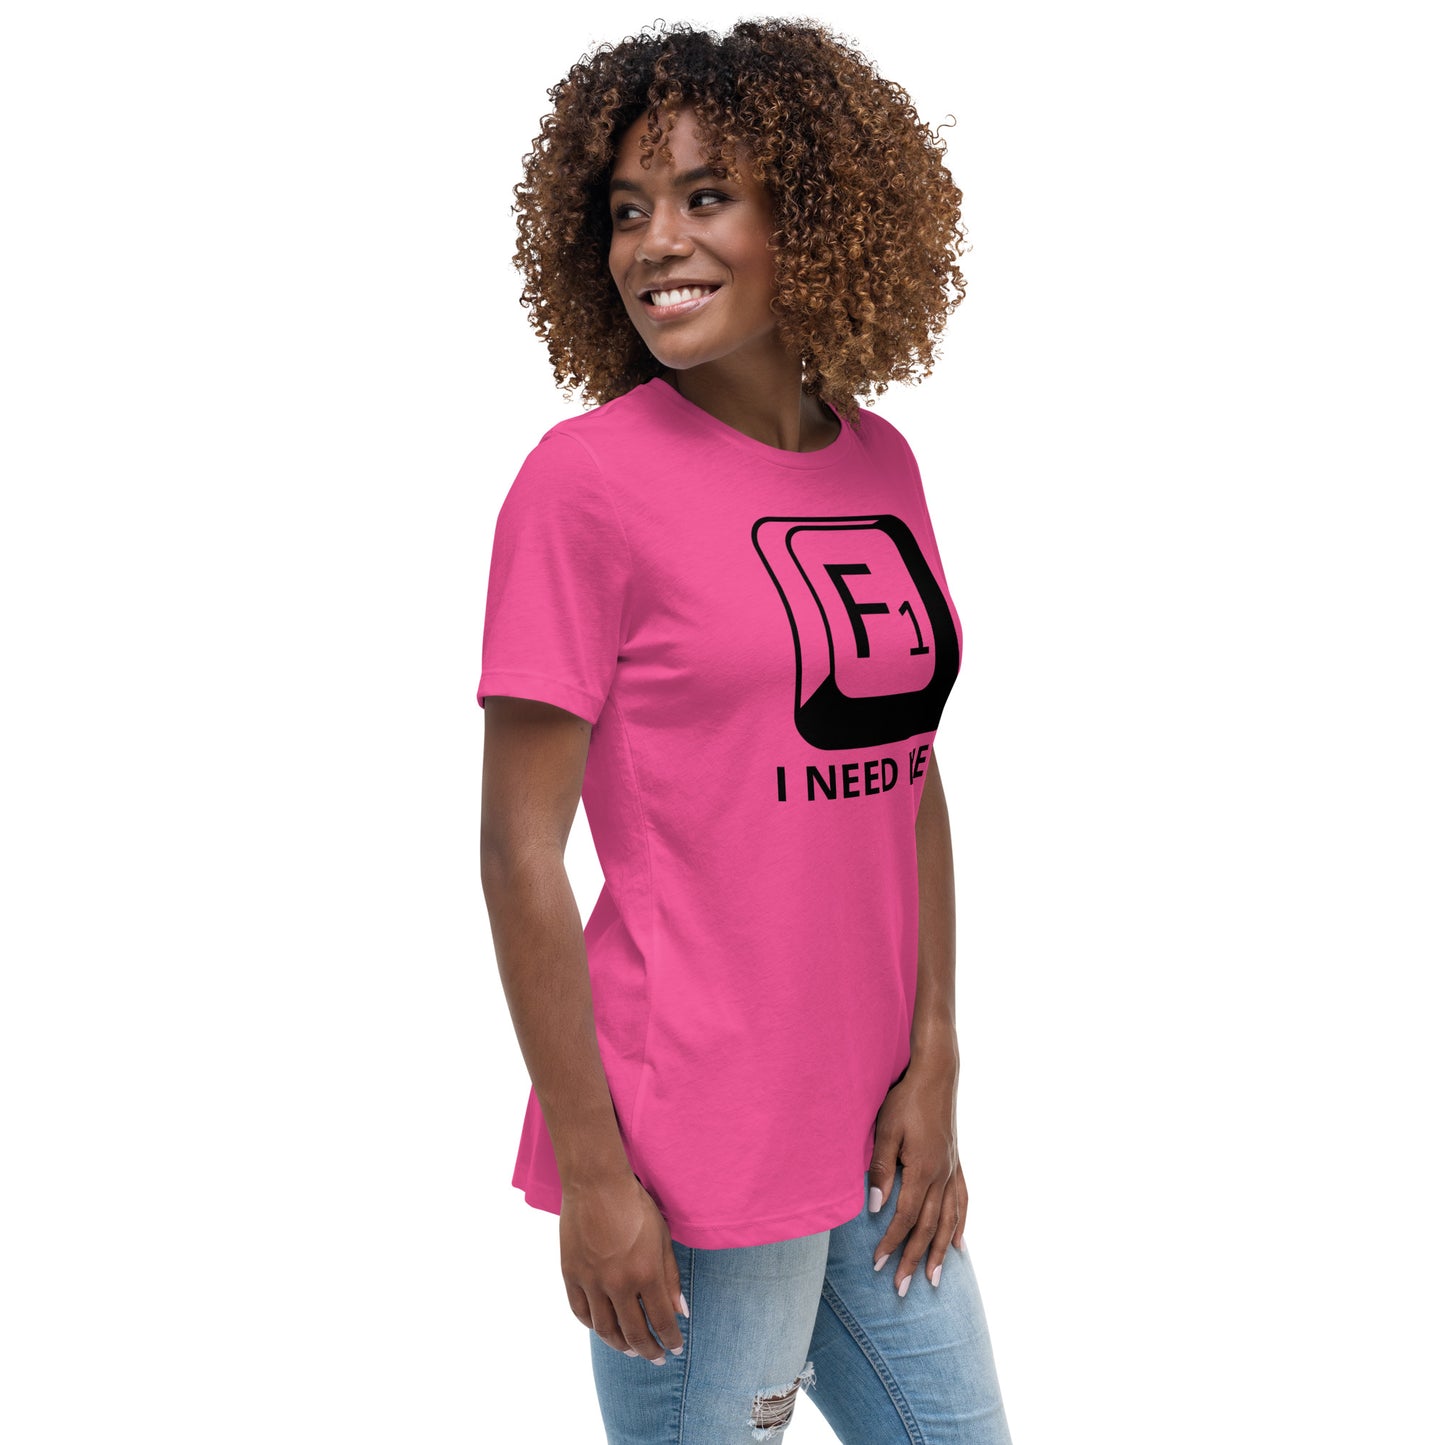 Woman with berry t-shirt with picture of "F1" key and text "I need help"